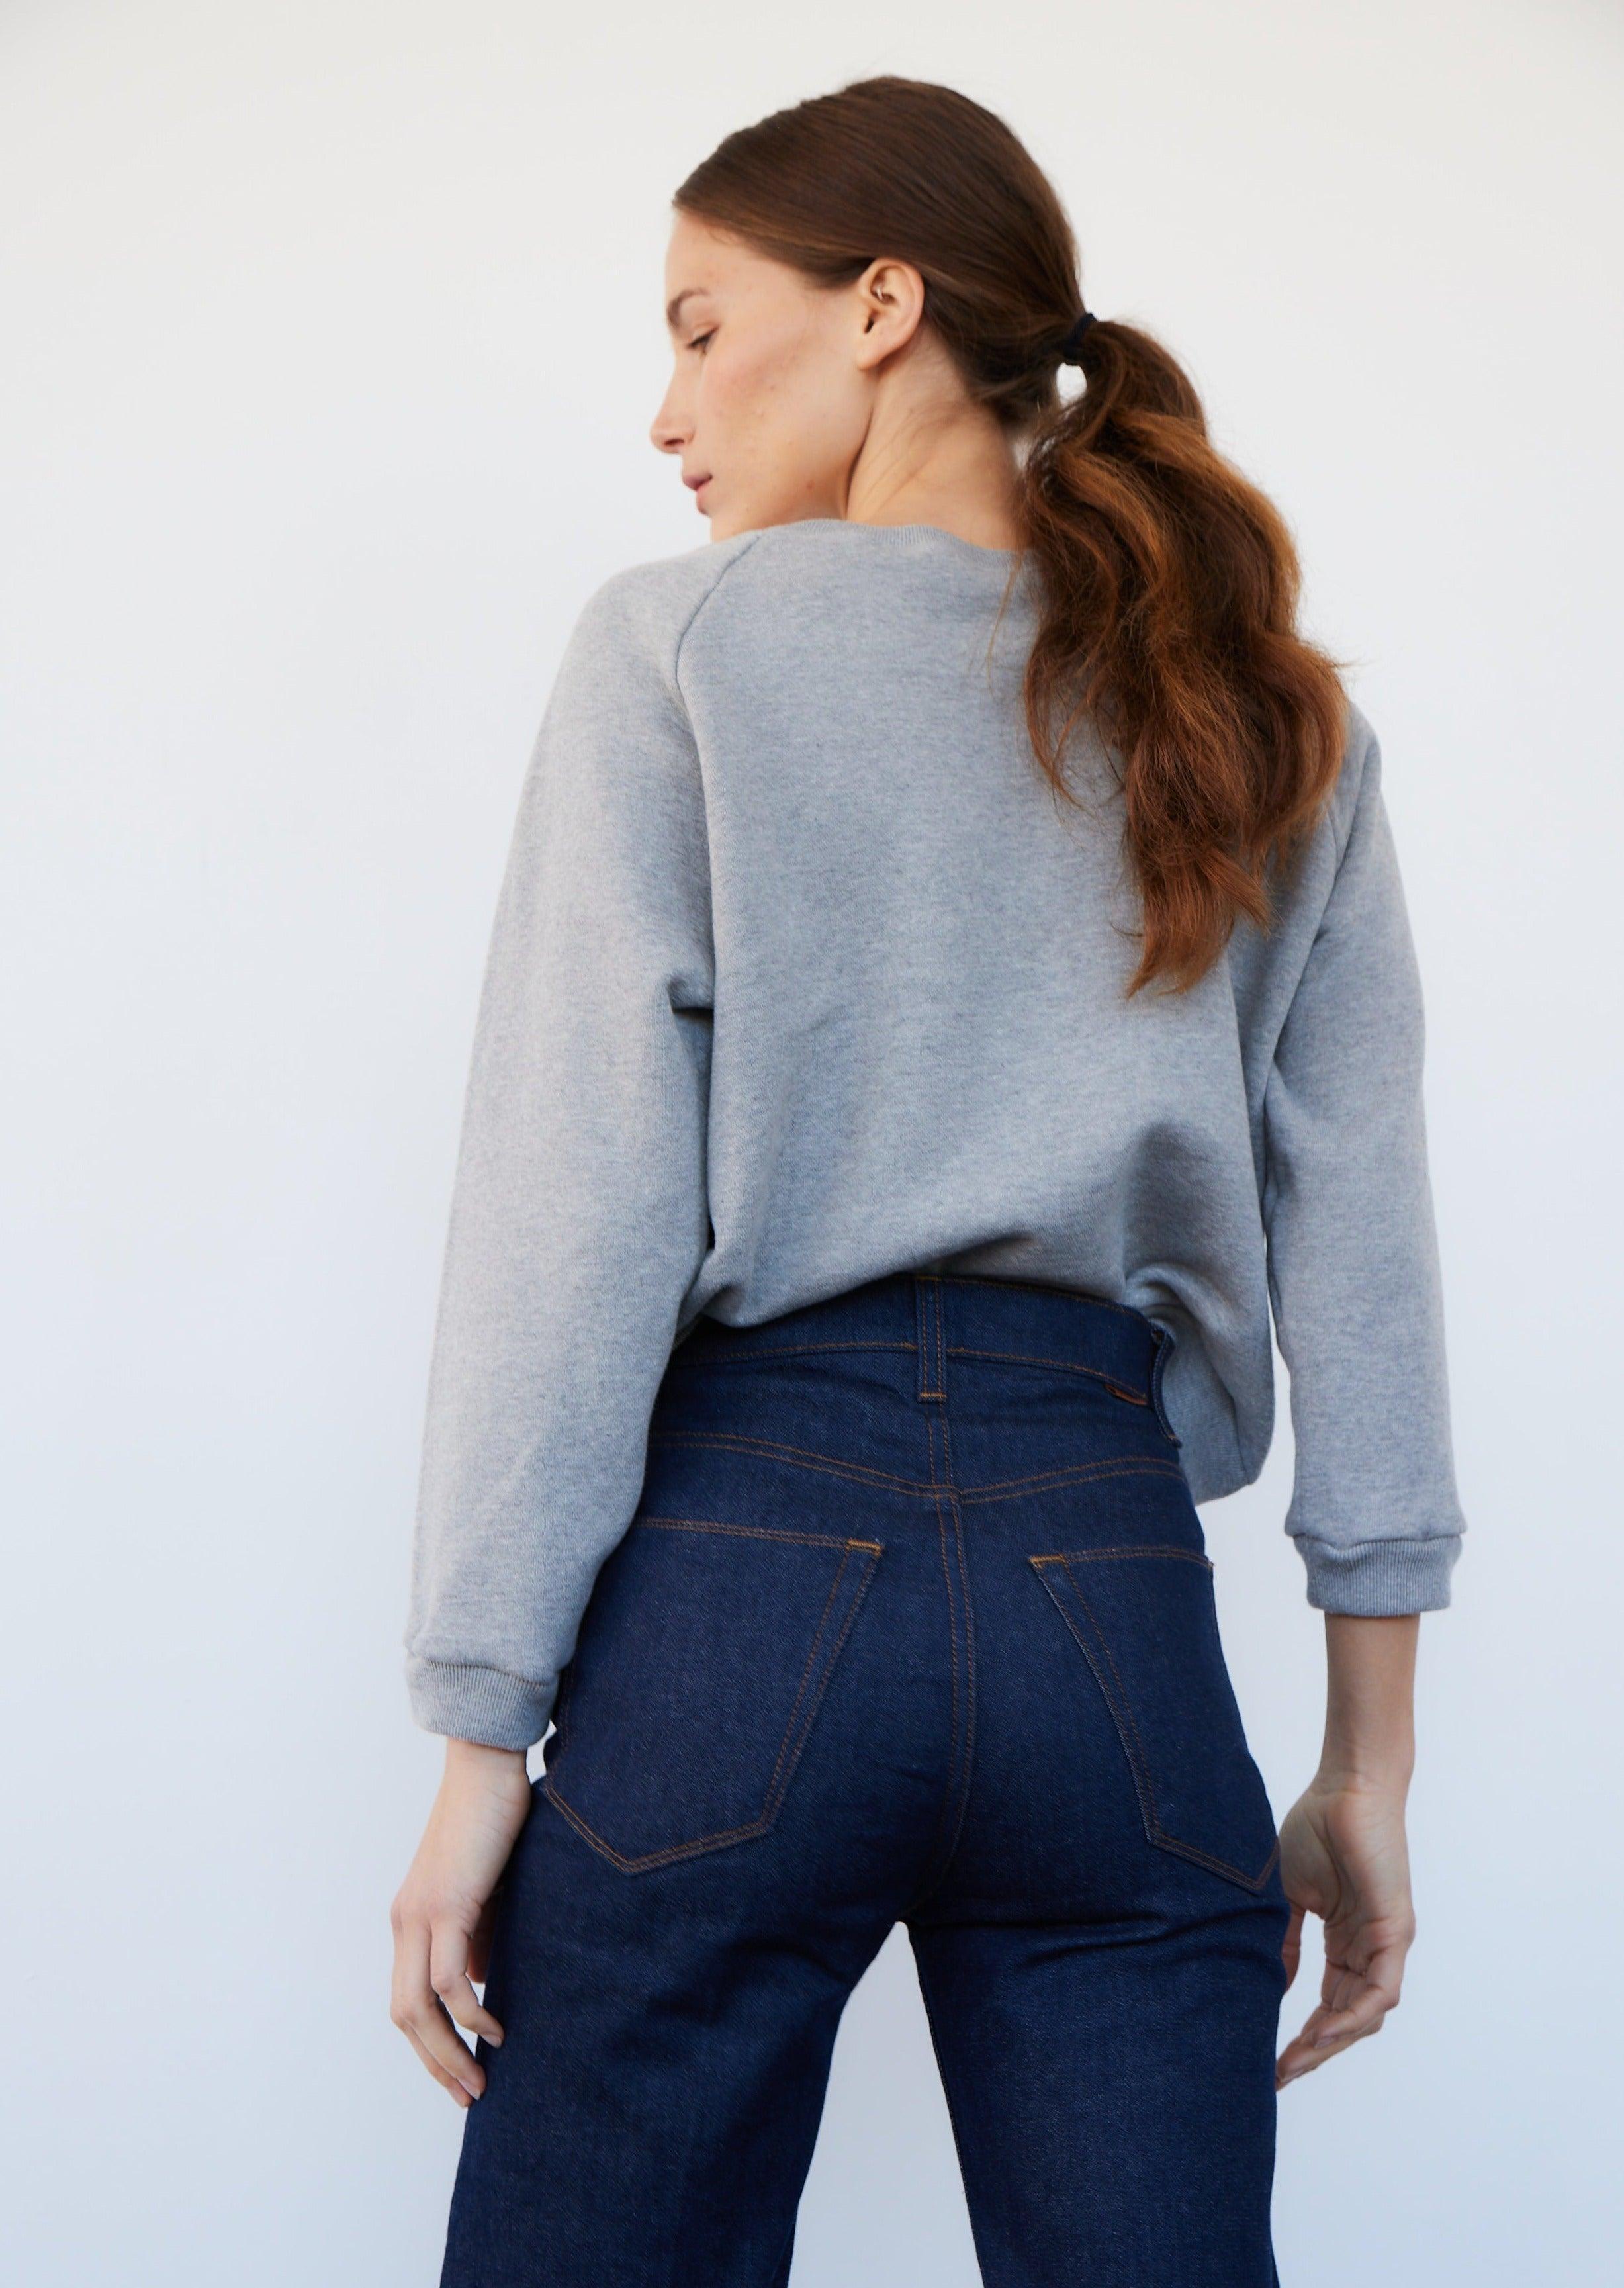 The Daily Sweatshirt in Heather Grey Back View Tucked In